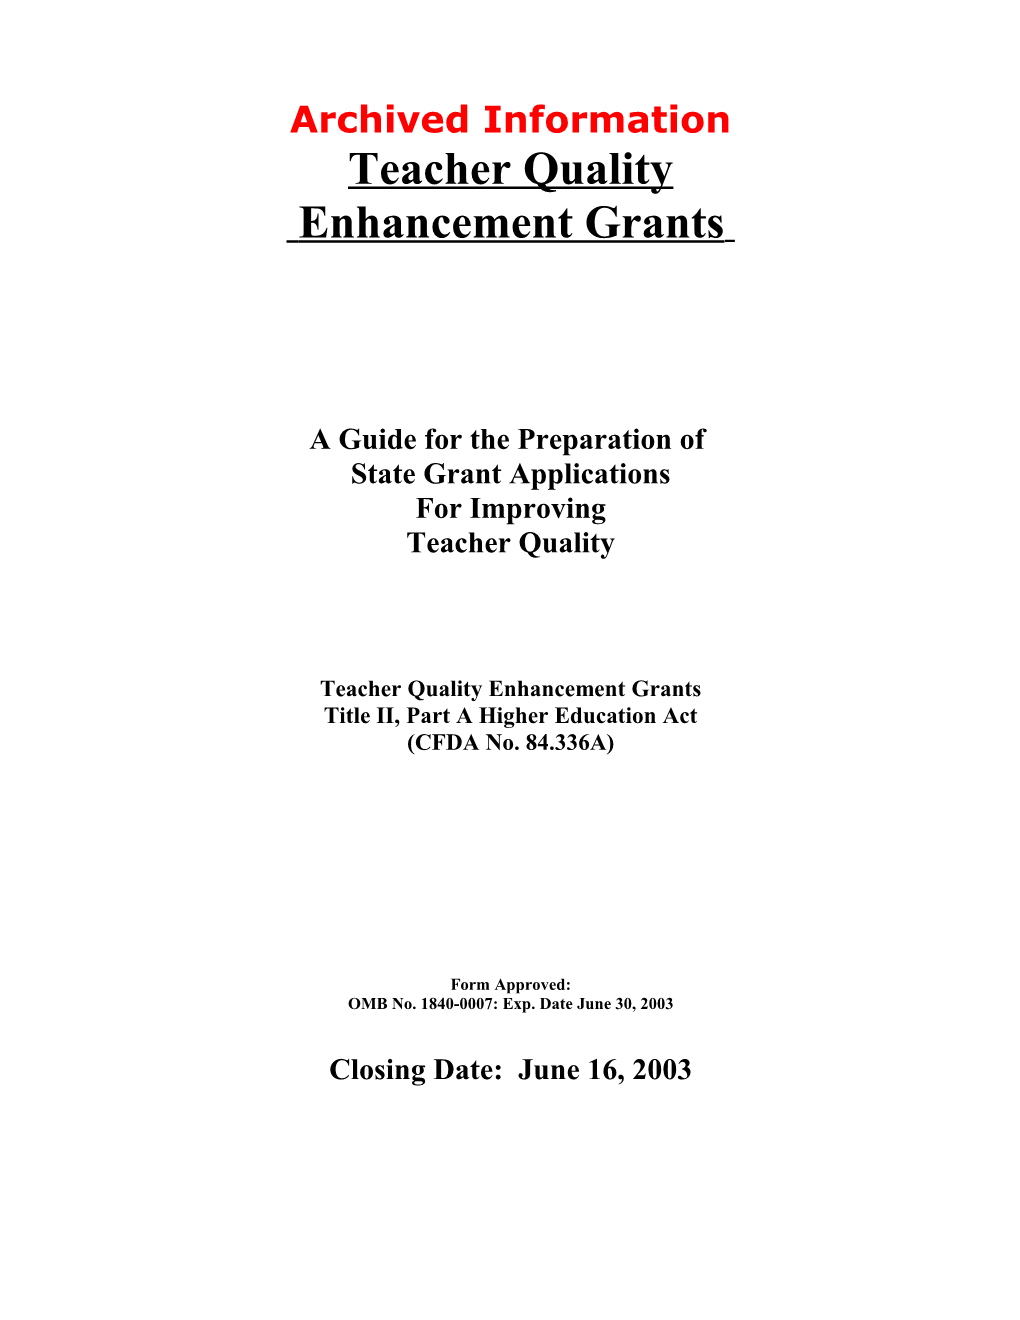 Archived: a Guide for the Preparation Fo State Grant Applications for Improving Teacher